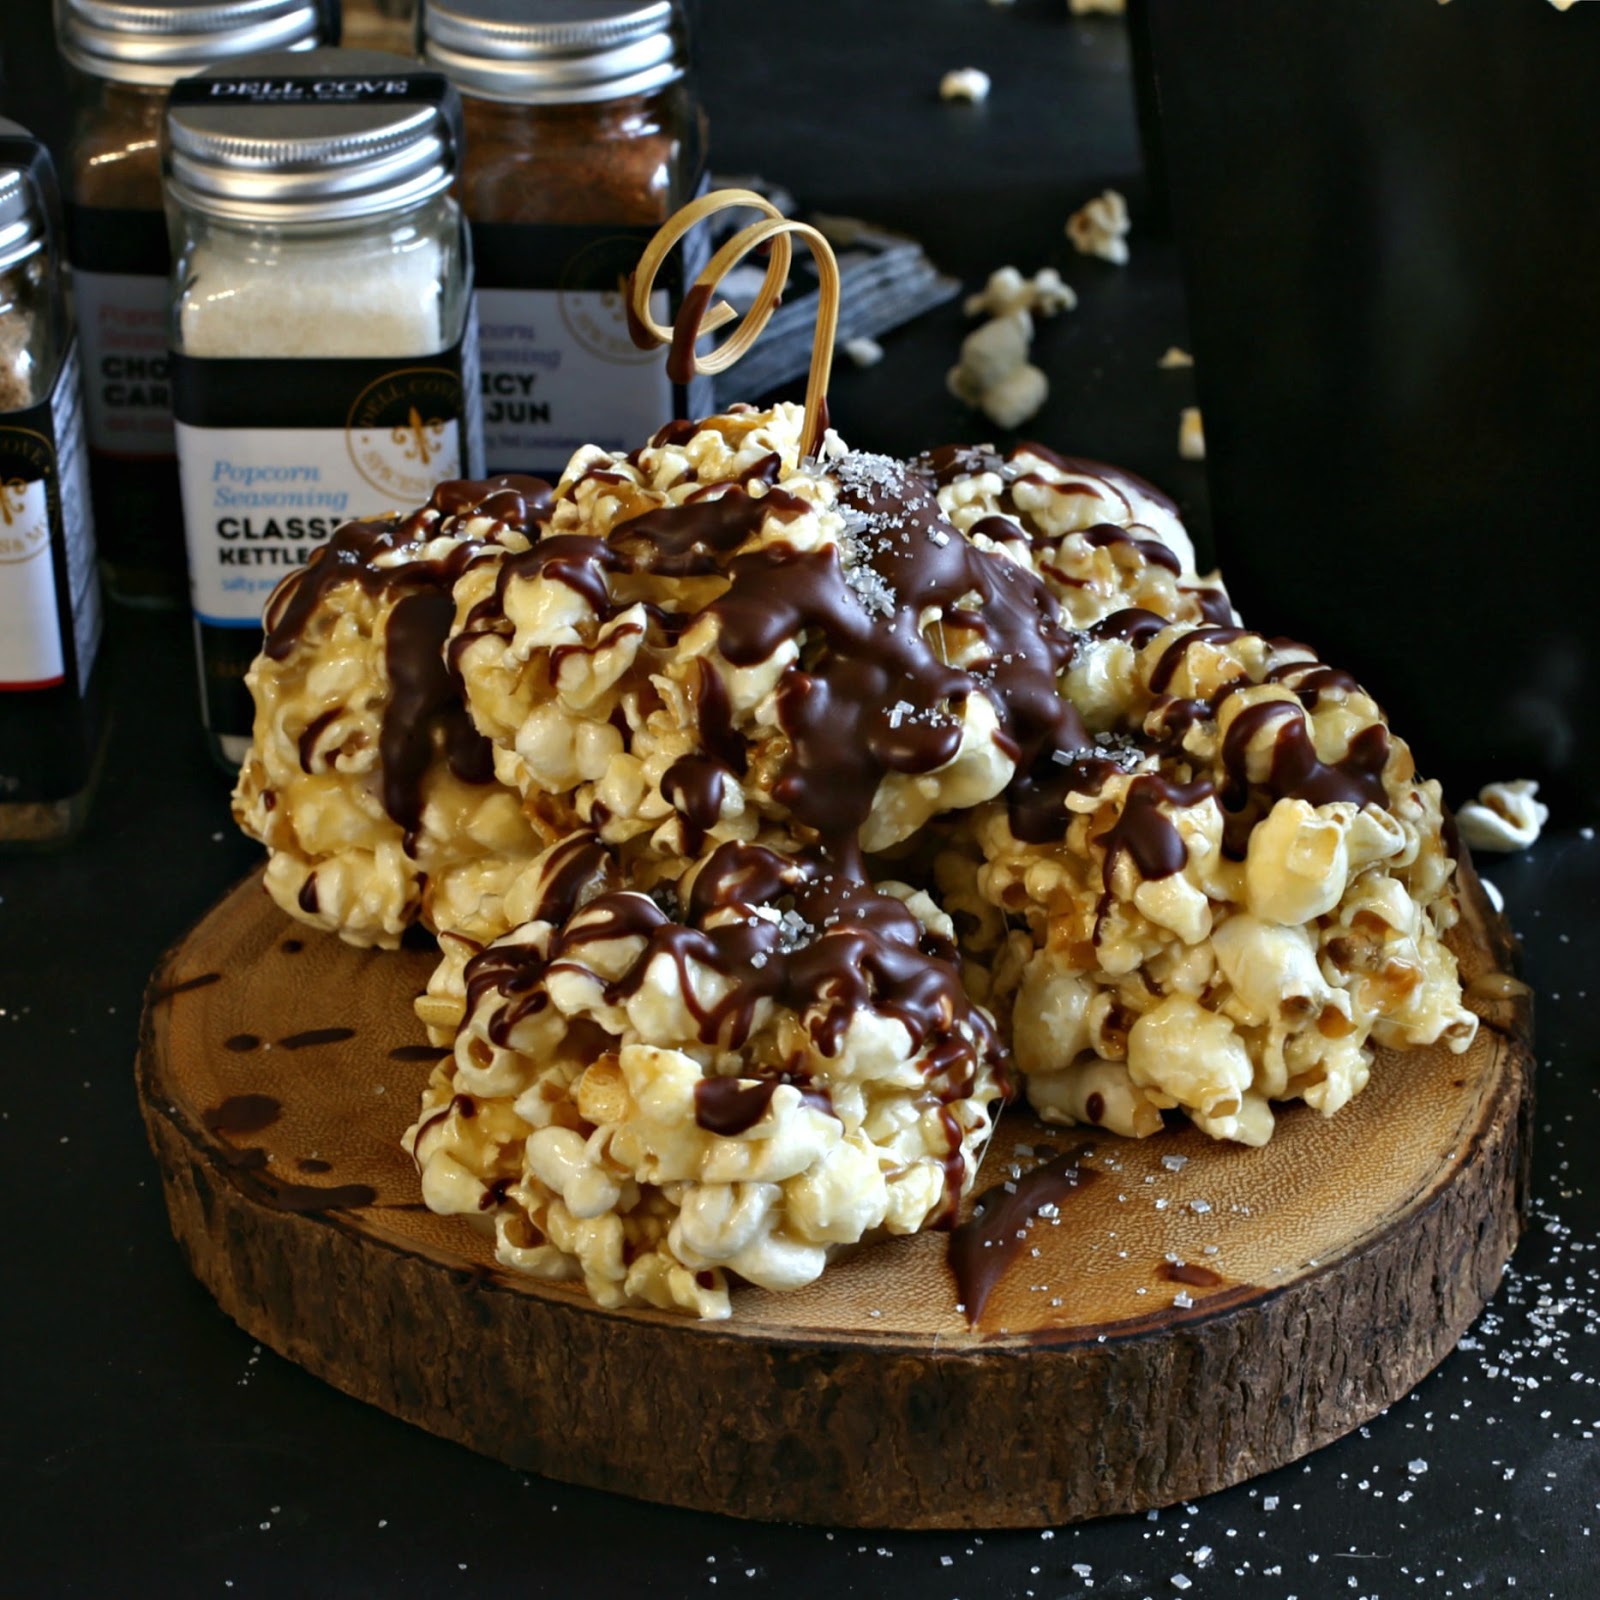 Sweet popcorn balls drizzled with chocolate.